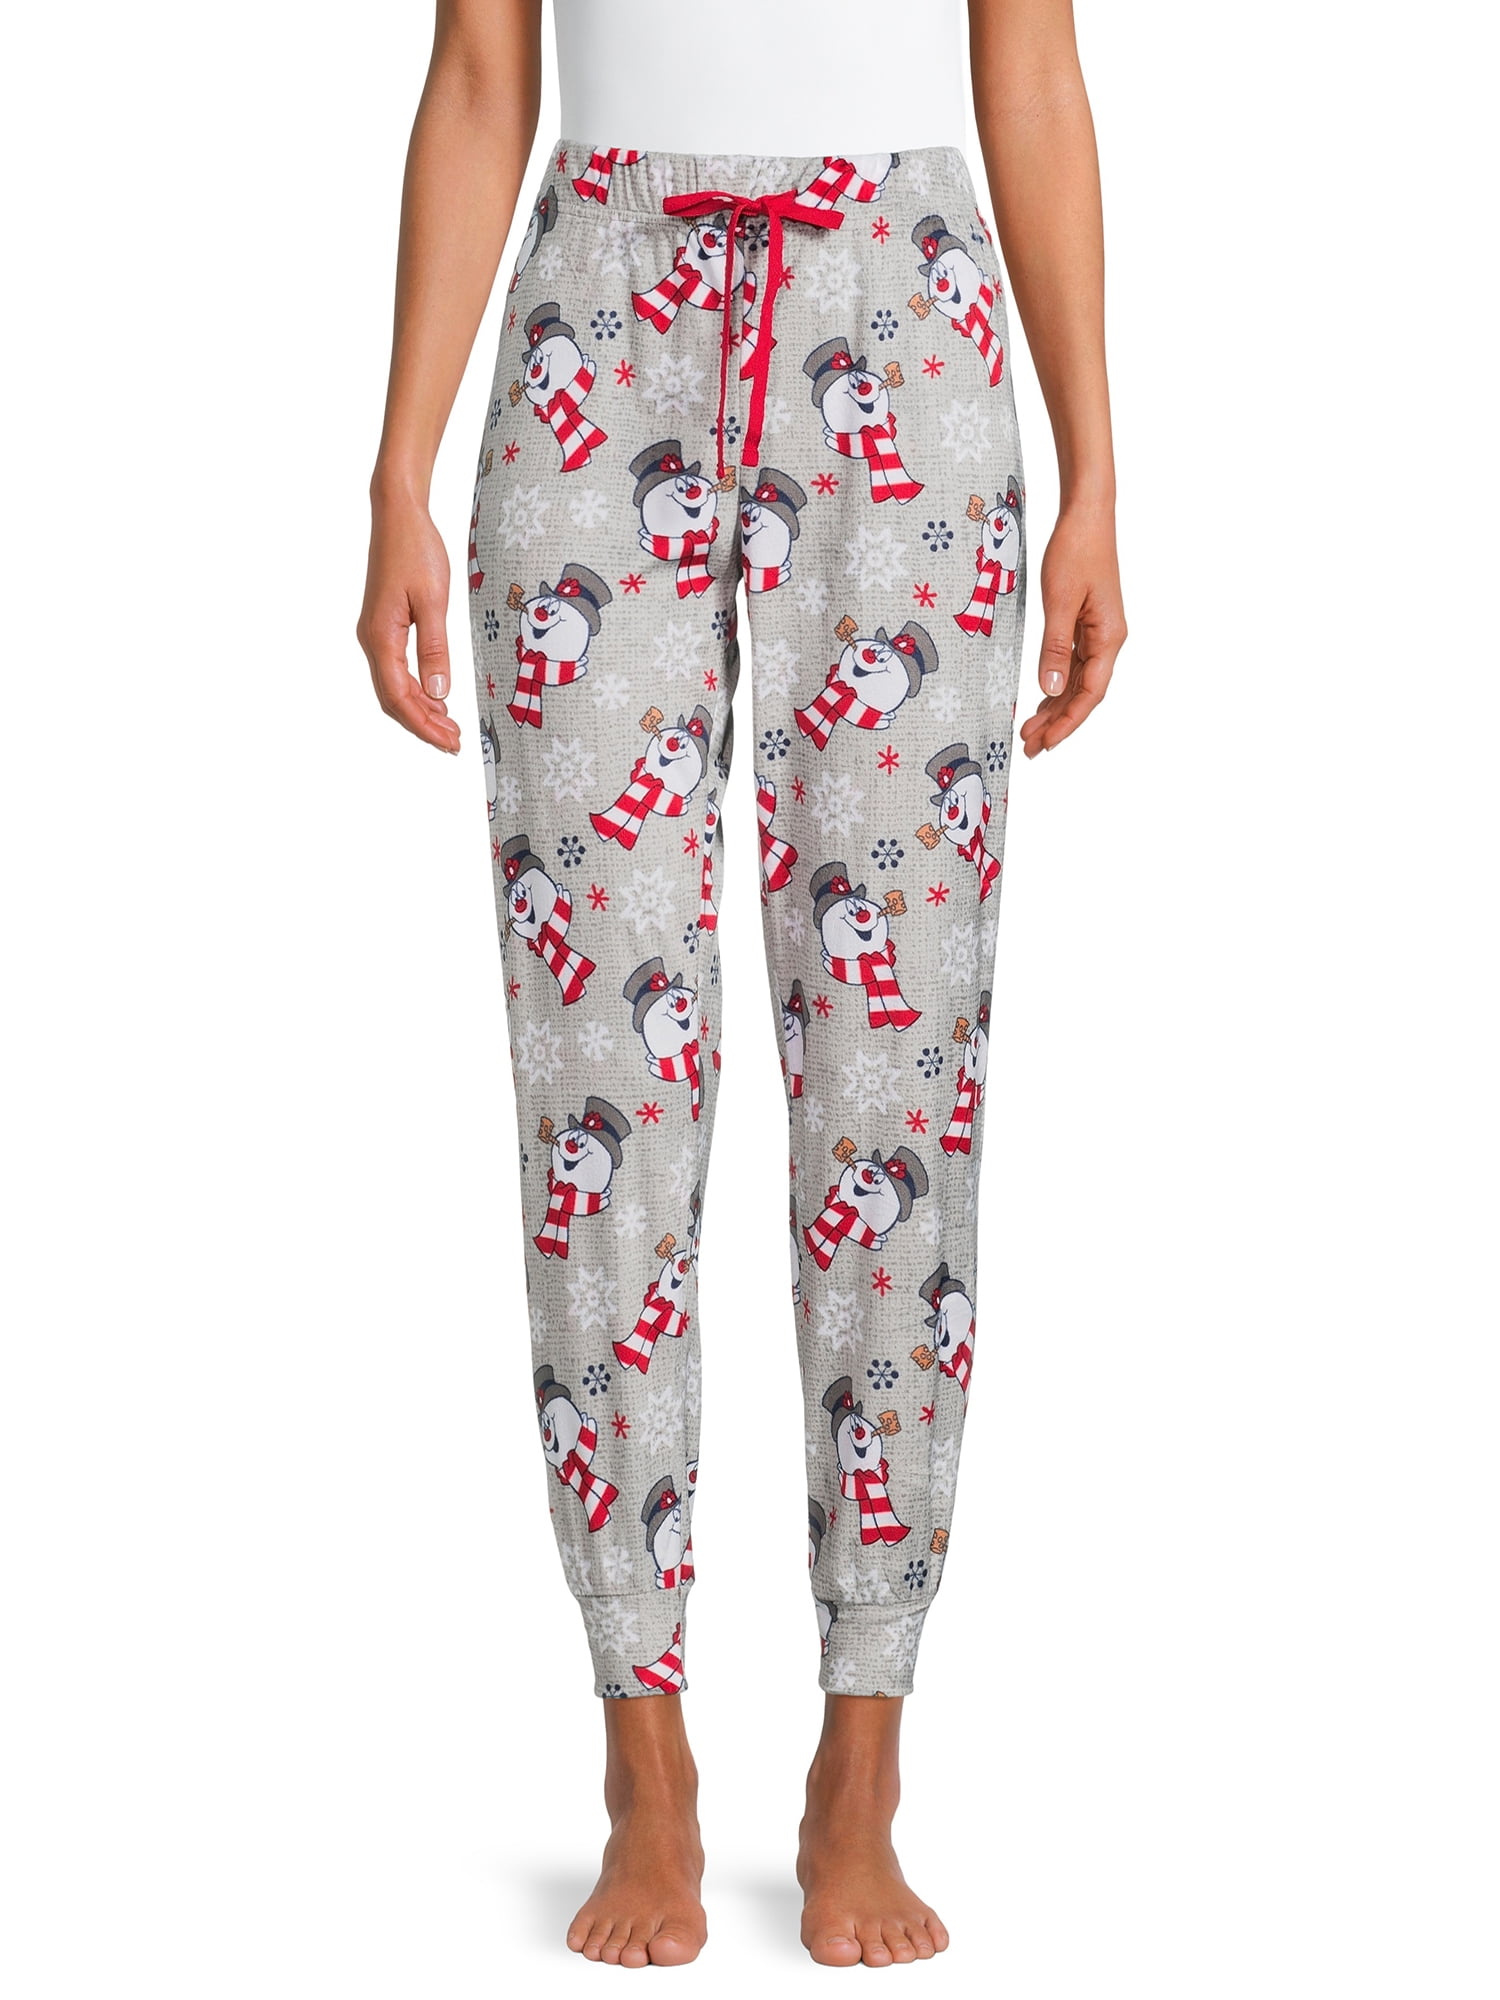 Briefly Stated Womens Care Bear Cuffed Jogger Sleep Pant 